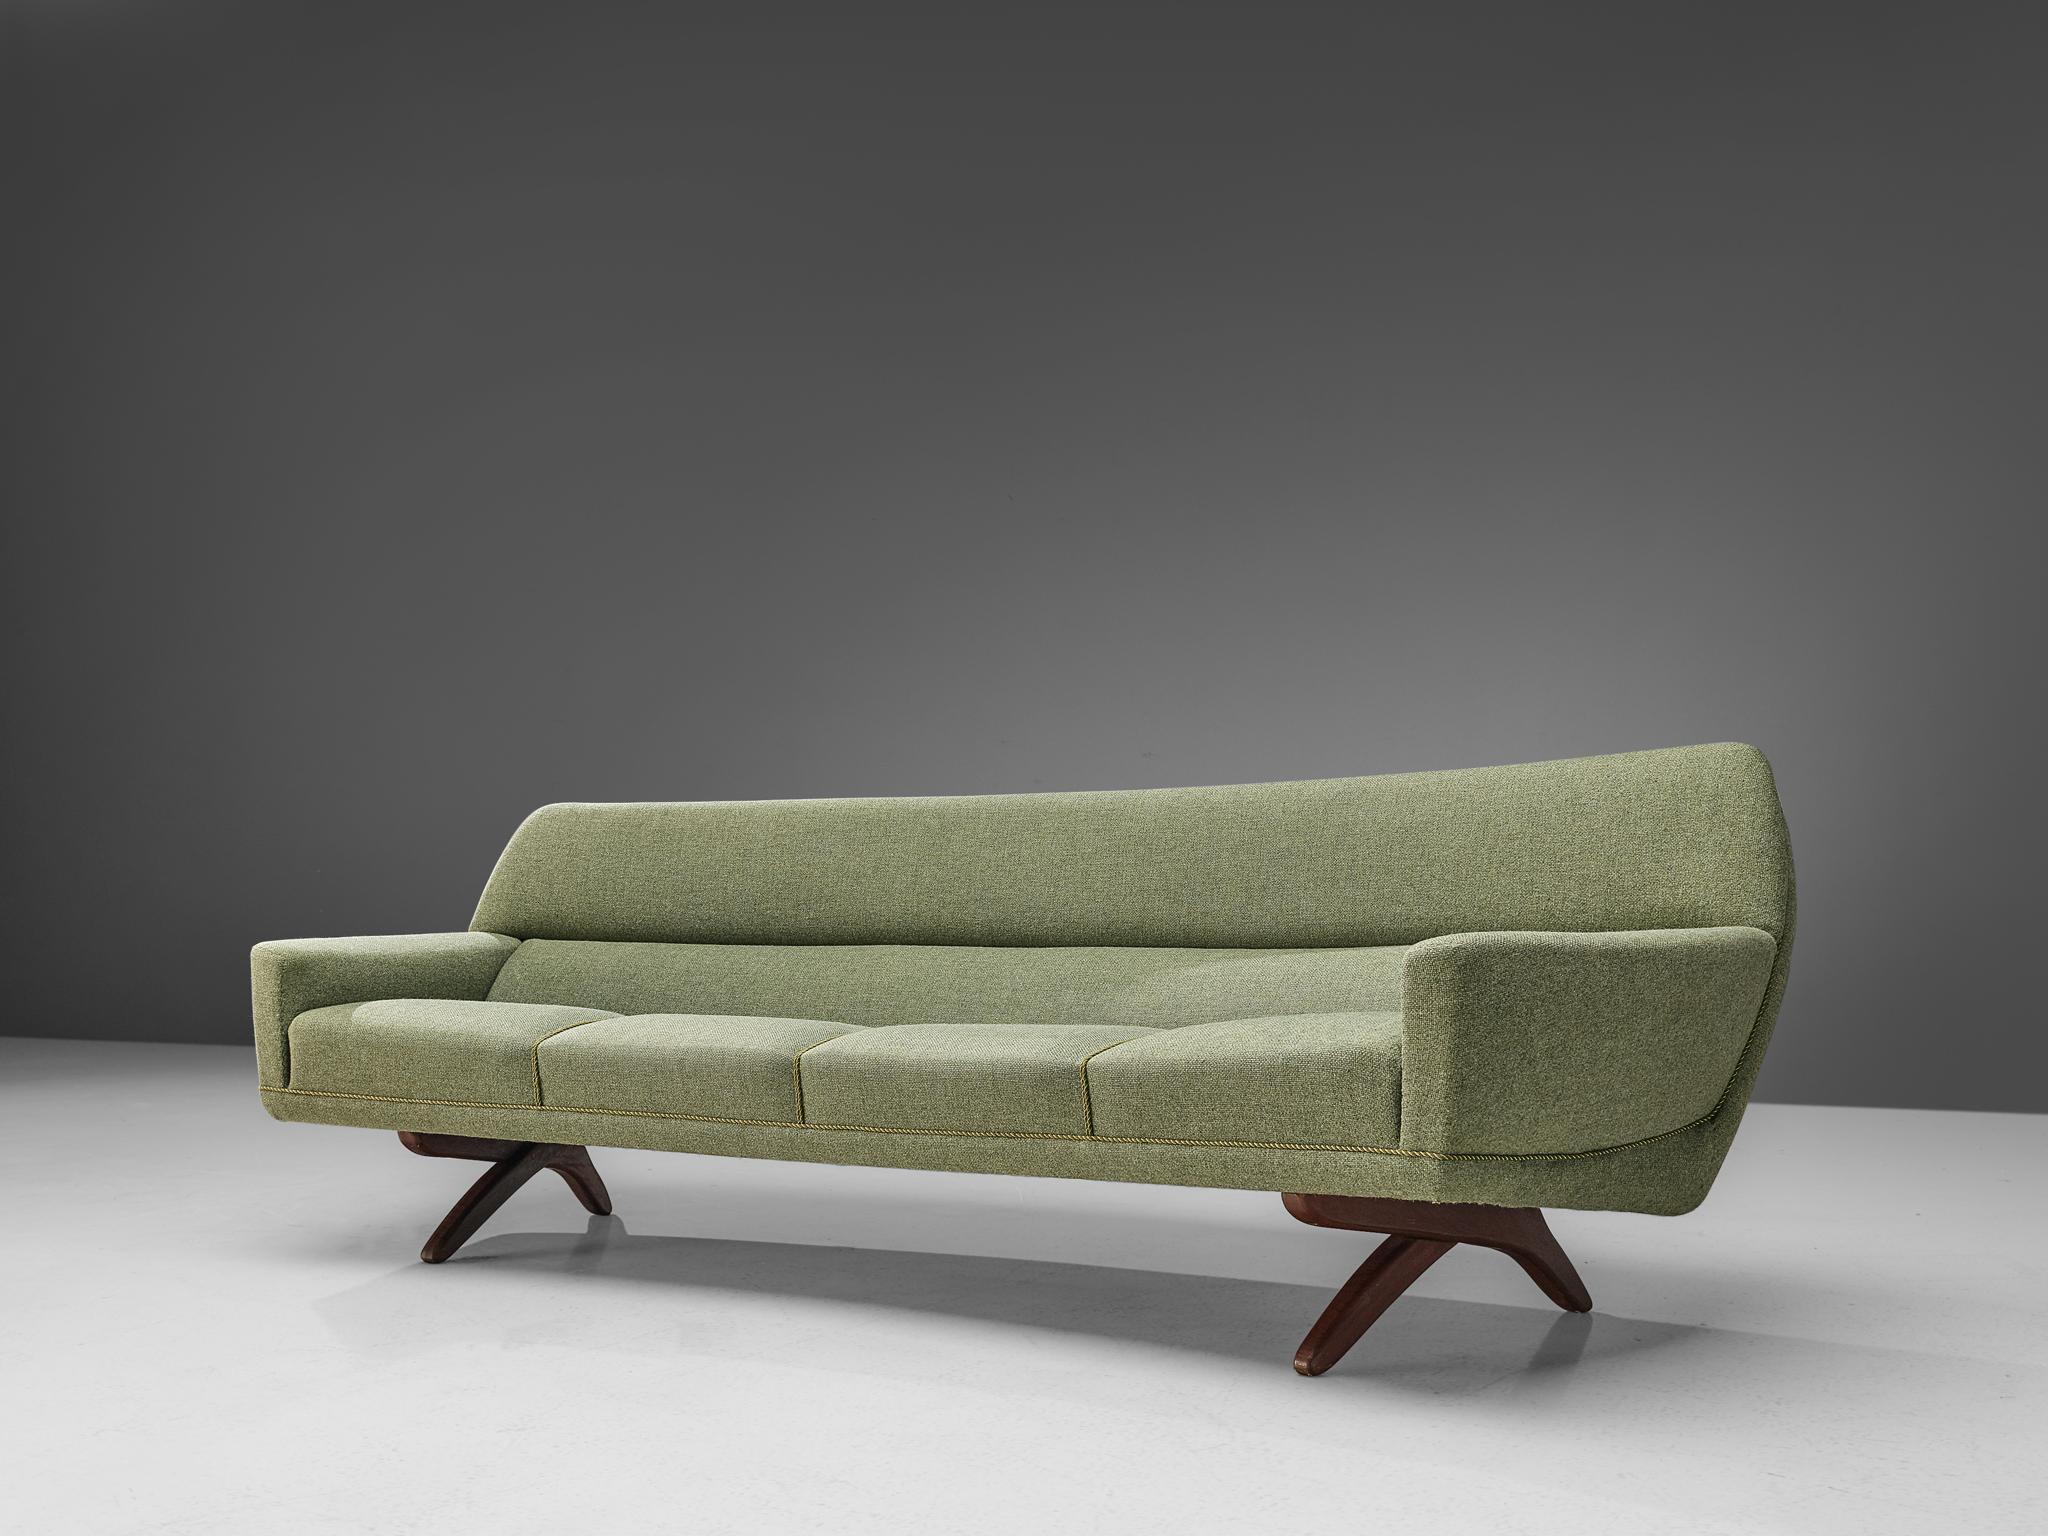 Leif Hansen for Kronen Møbelfabrik, four-seat sofa, green woolen upholstery and teak, Denmark, 1960s. 

This curved sofa is designed to provide an ultimate level of comfort. The slightly curved and tilted back, the thick foam and high-quality fabric